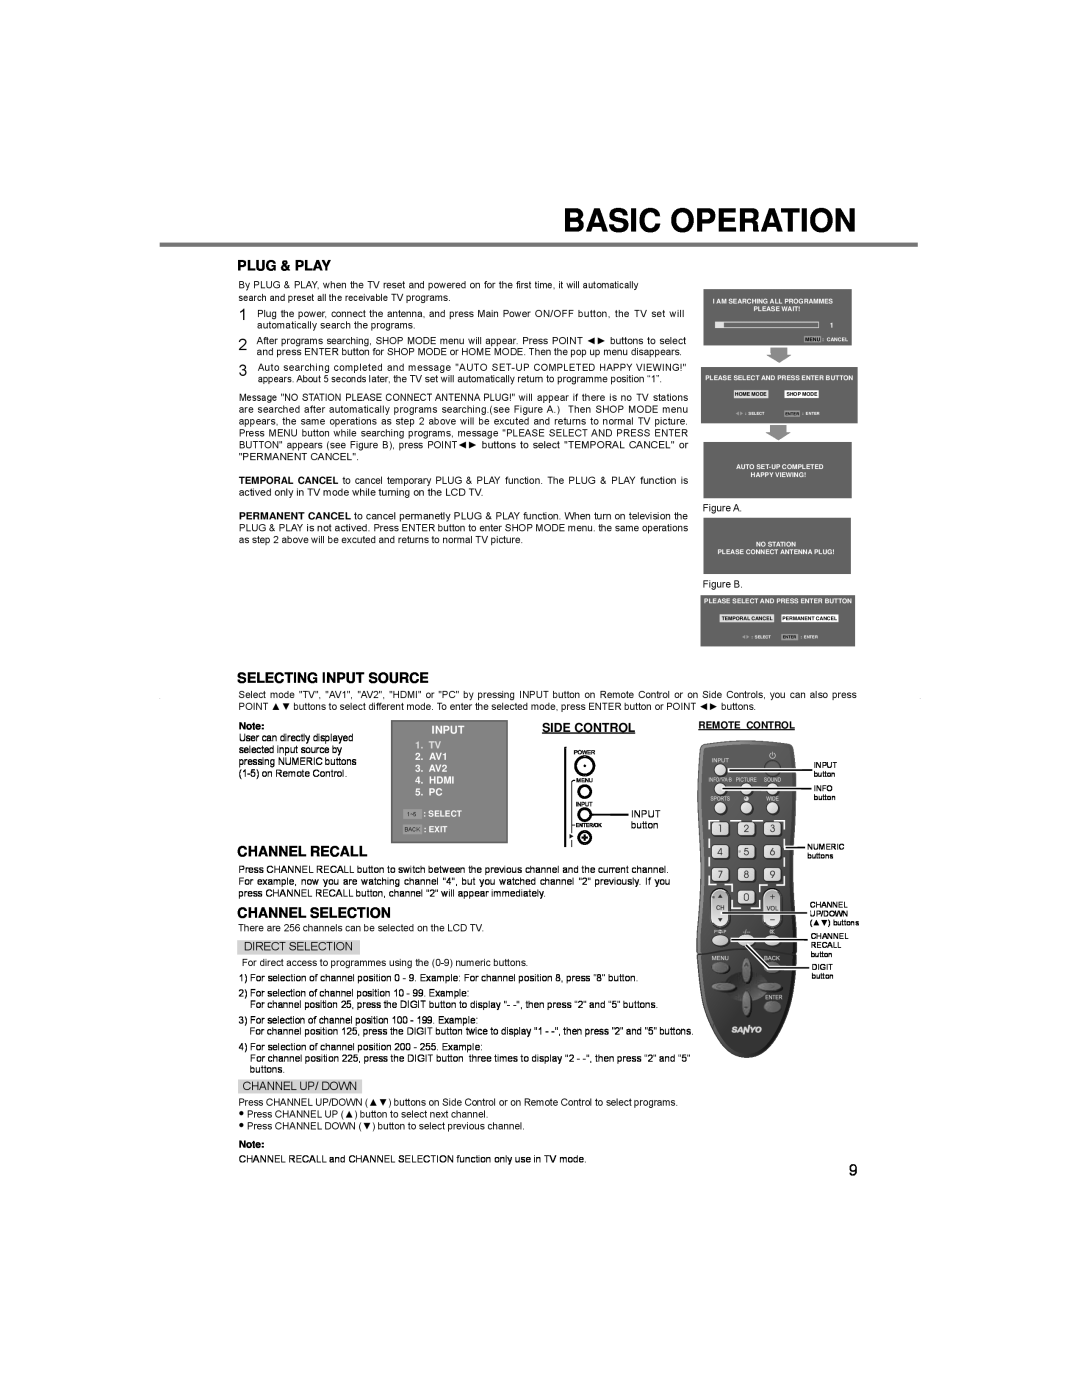 Sanyo LCE-24C100F(N) Plug & Play, Selecting Input Source, Channel Recall, Channel Selection, Side Control, Basic Operation 